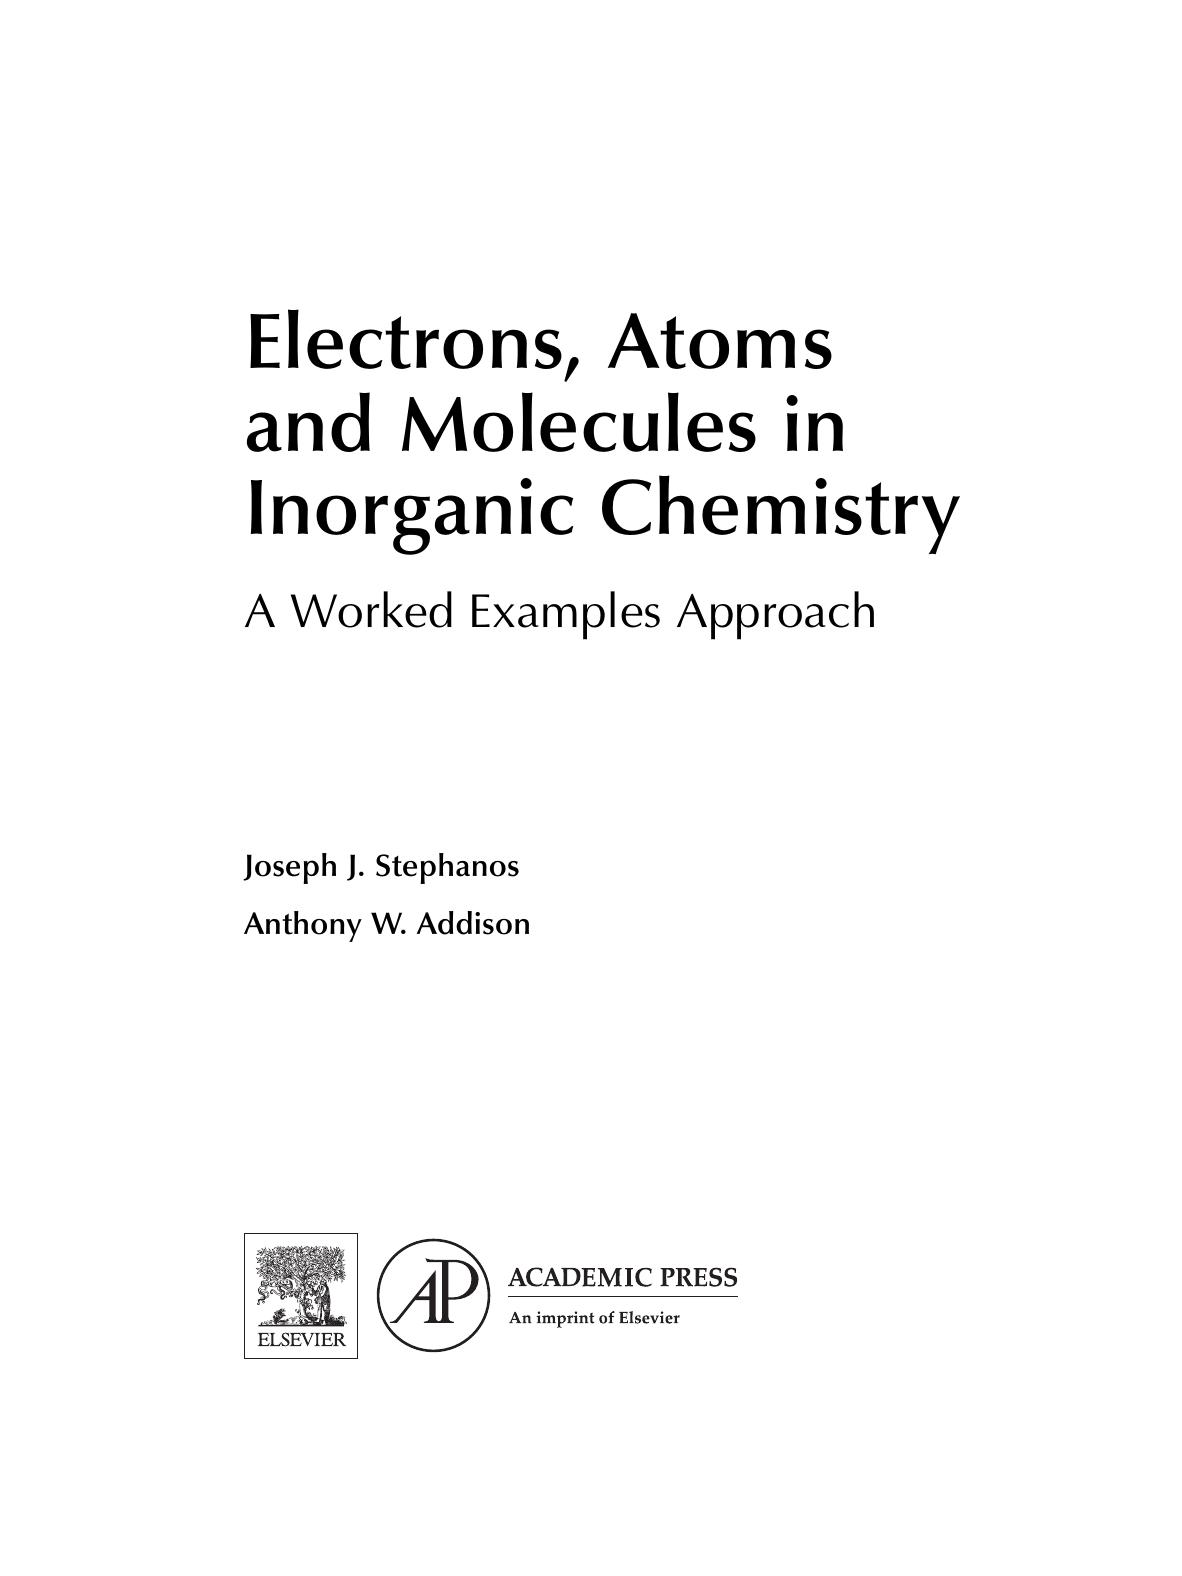 Electrons Atoms and Molecules in Inorganic Chemistry. A worked Examples Approach ( PDFDrive )